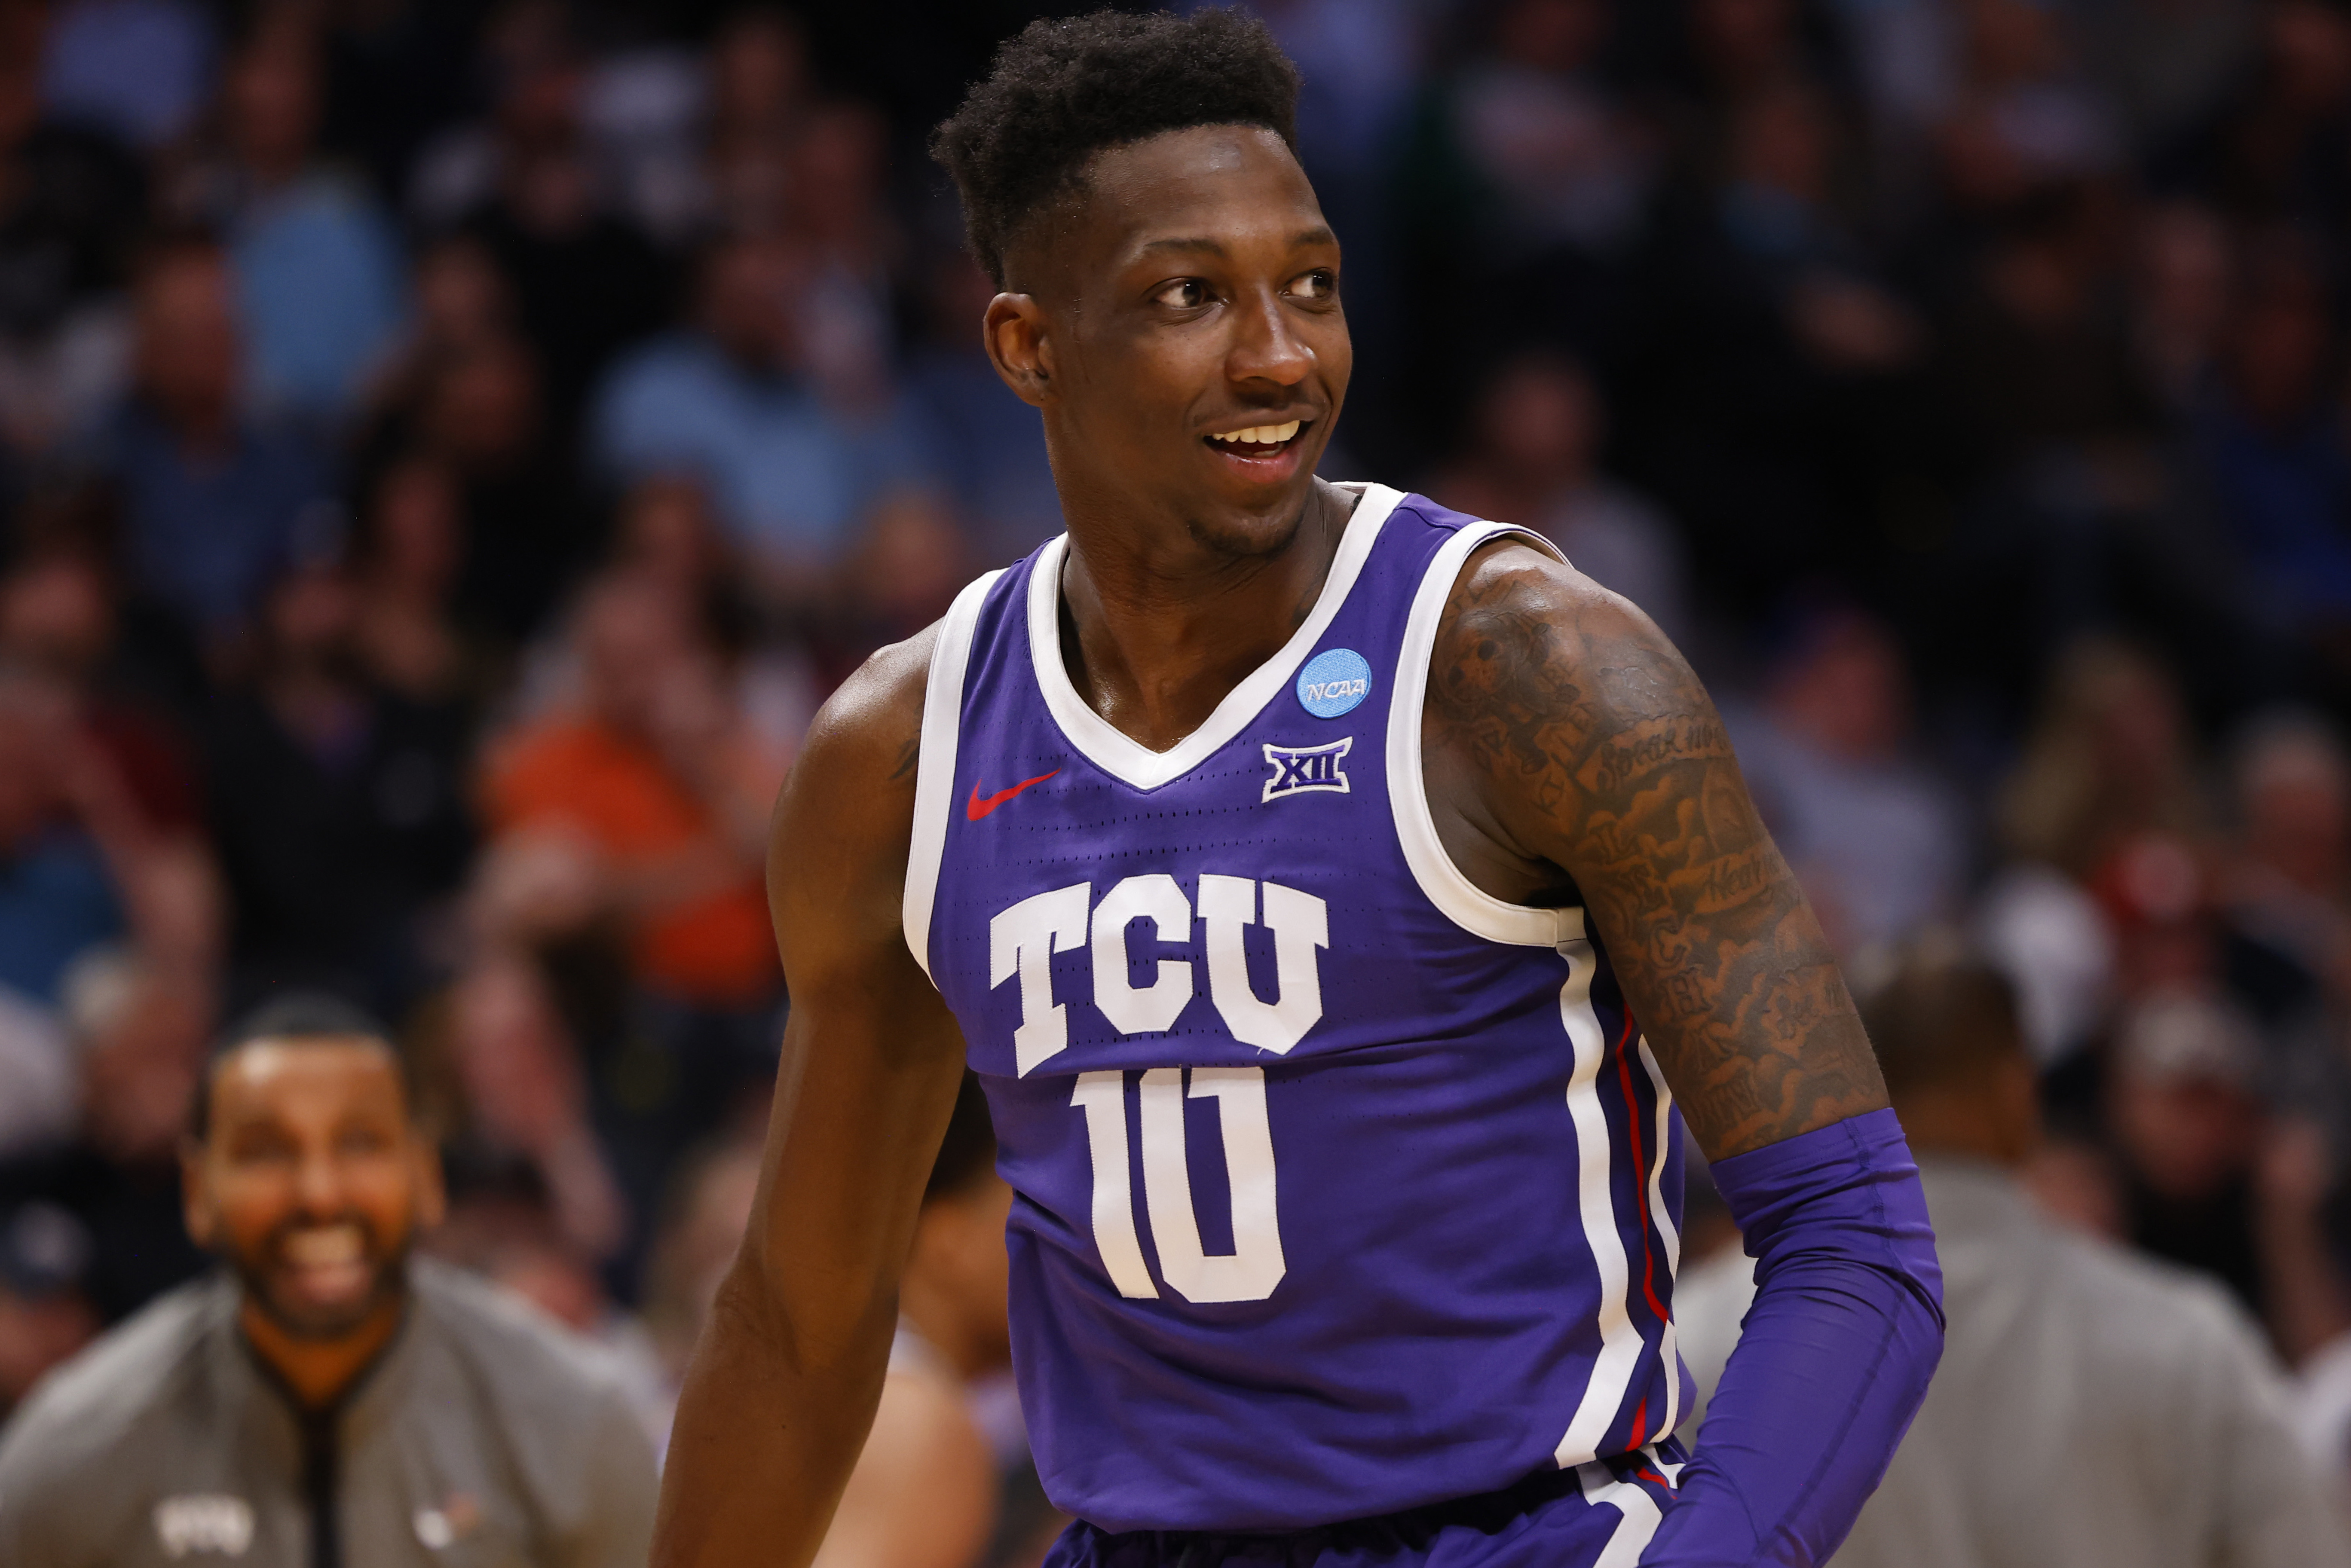 TCU Horned Frogs guard Damion Baugh celebrates in the first half against the Gonzaga Bulldogs at Ball Arena.